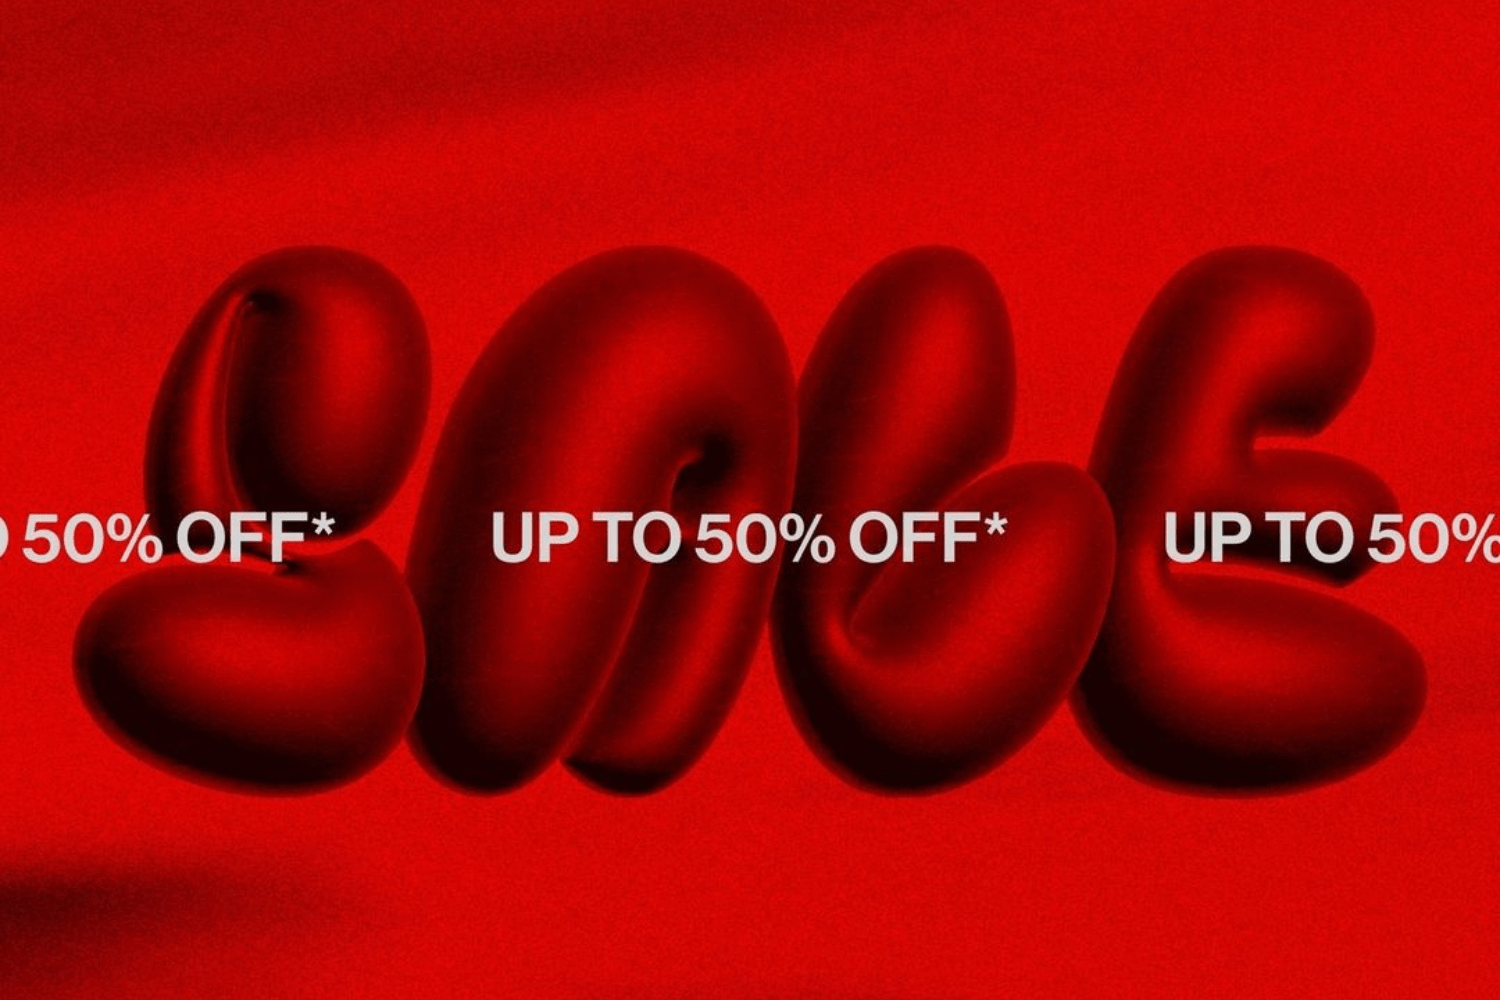 Footpatrol closes the year with high discounts